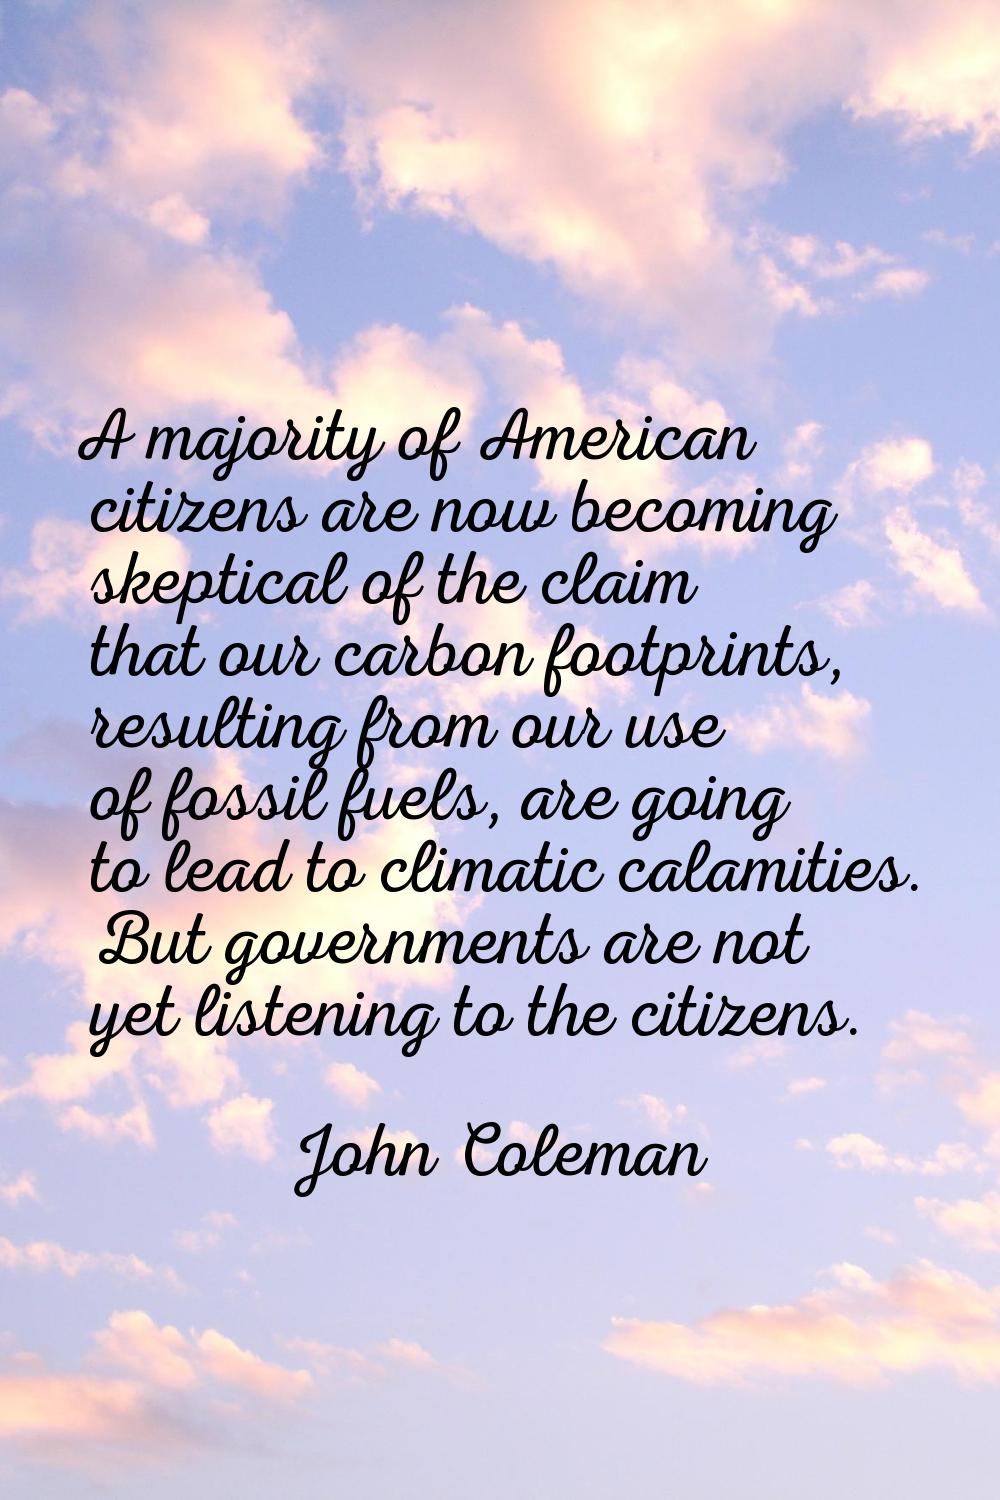 A majority of American citizens are now becoming skeptical of the claim that our carbon footprints,